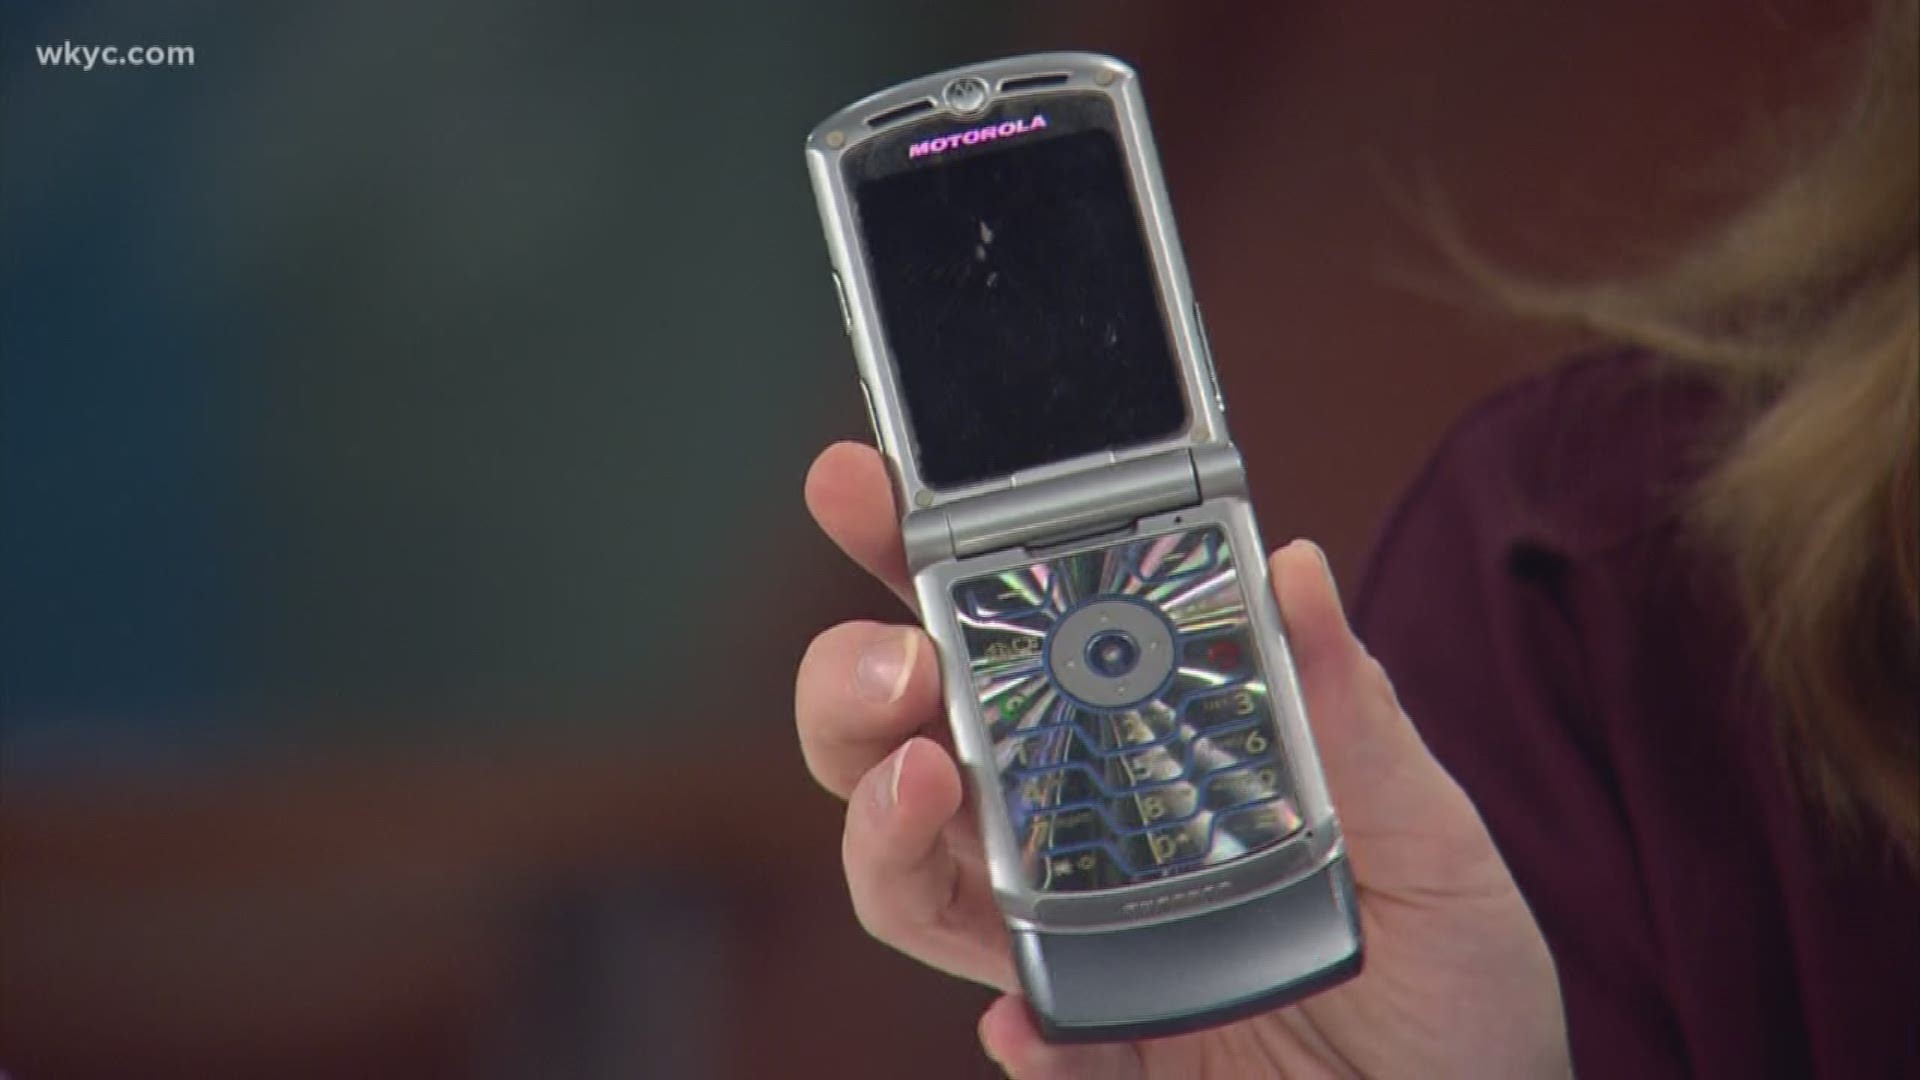 Jan. 17, 2019: What's old is new again. The Motorola Razr is reportedly making a comeback, but it will cost a lot more than it did all those years ago.